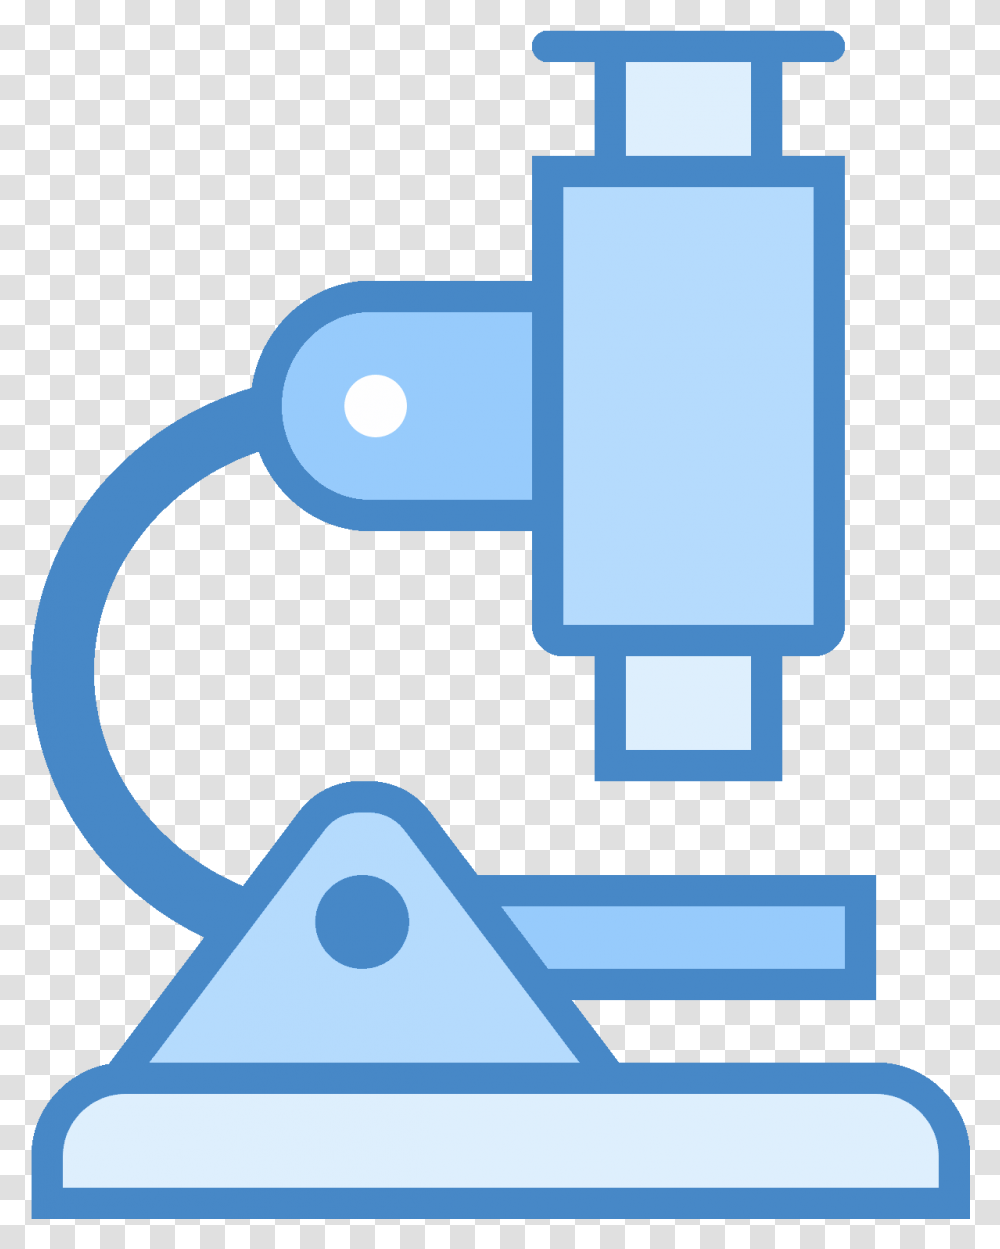 The Icon Is Depicting A Microscope Ikonki Mikroskop, Adapter, Plug Transparent Png